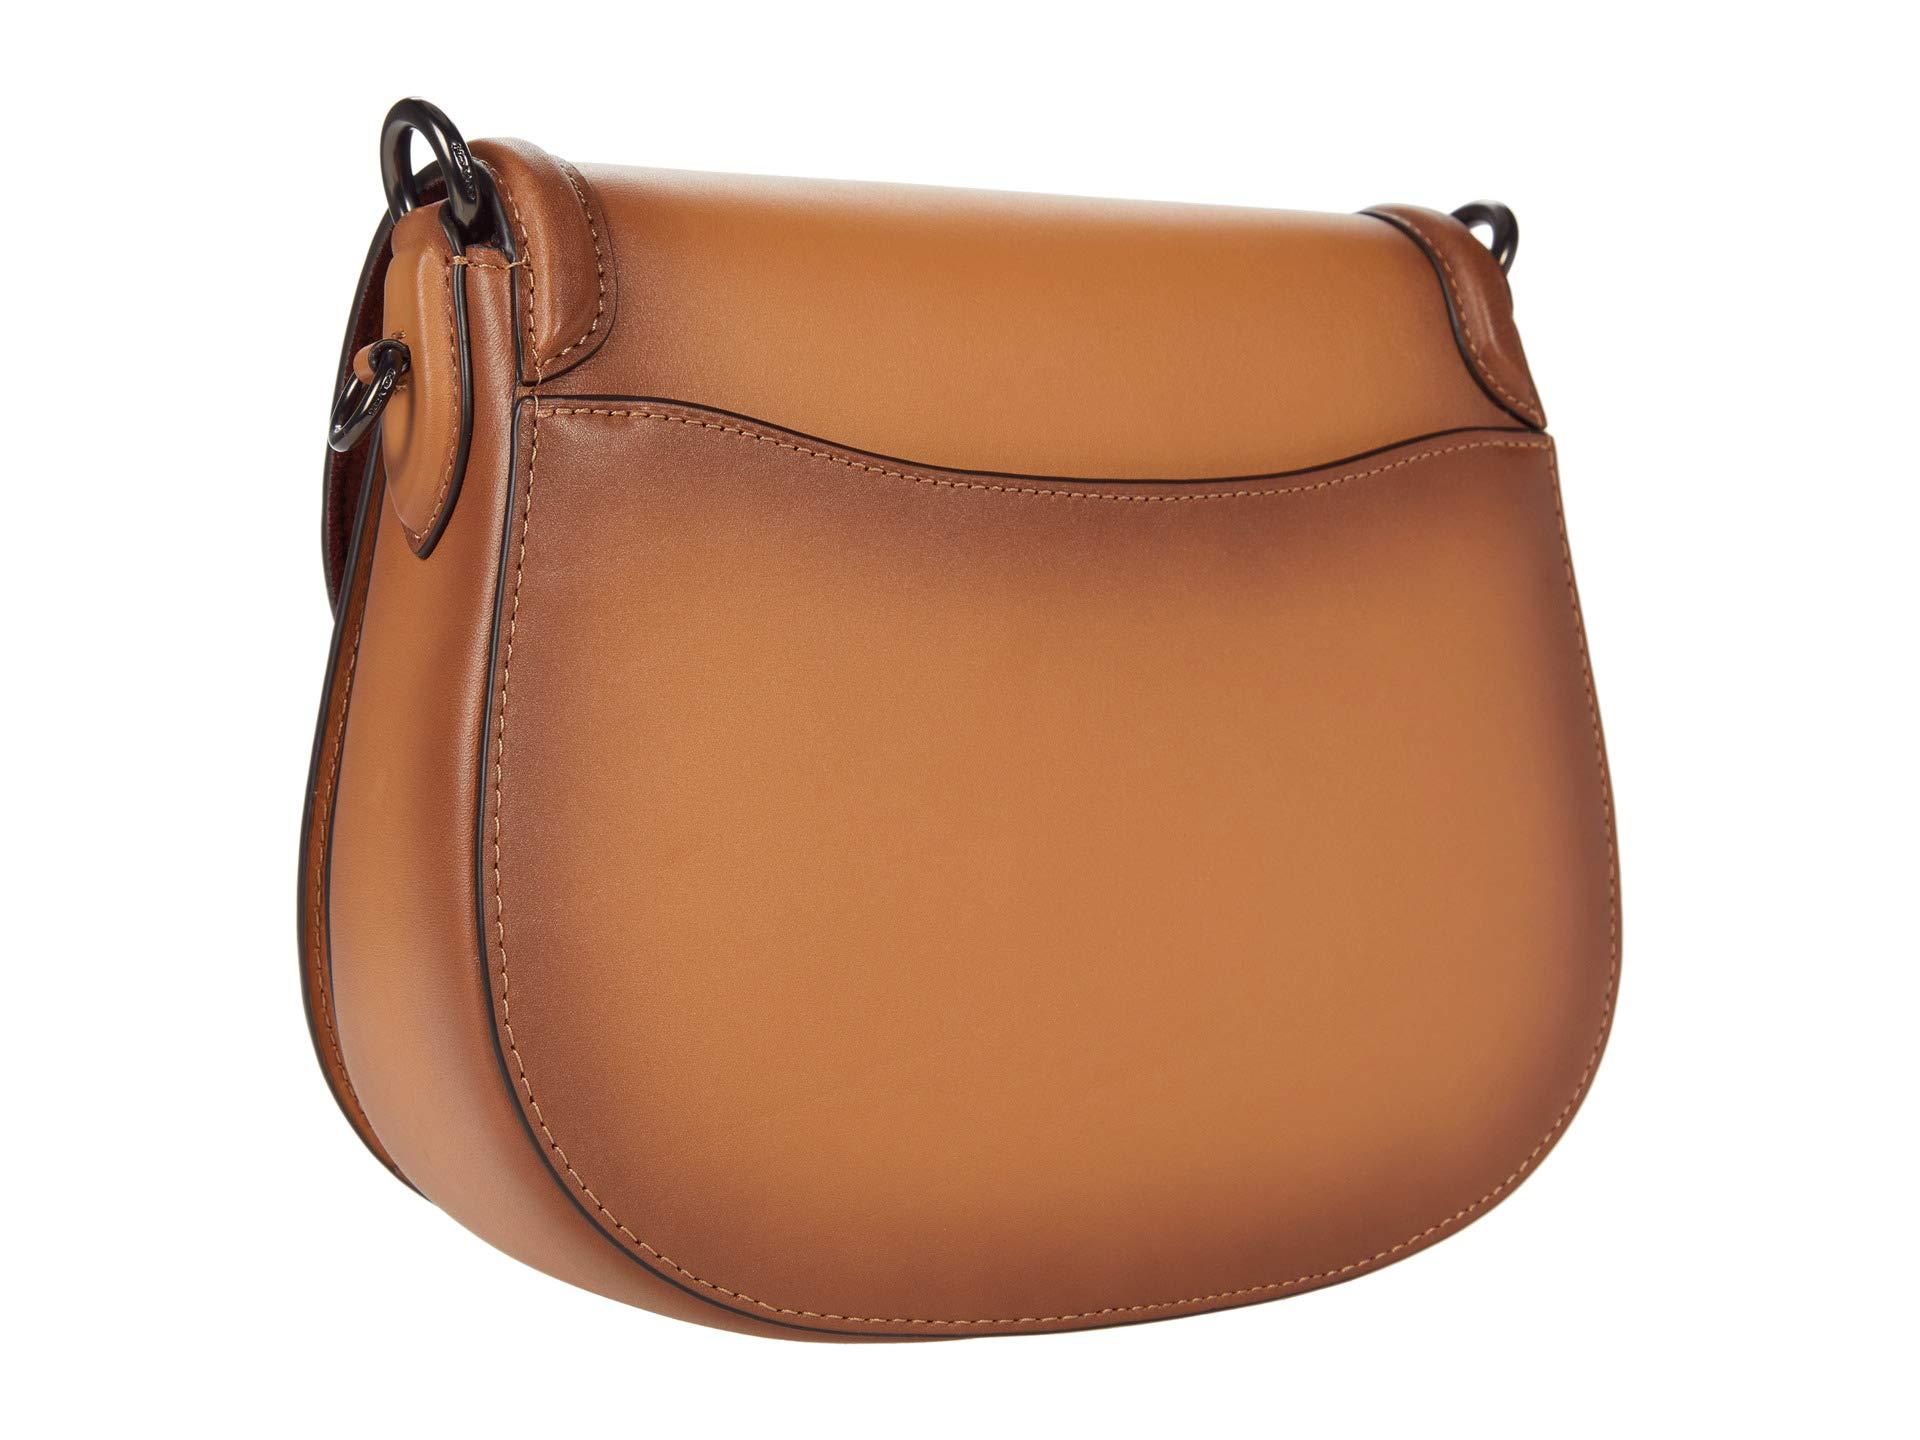 COACH Glovetanned Leather Beat Saddle Bag in Brown | Lyst